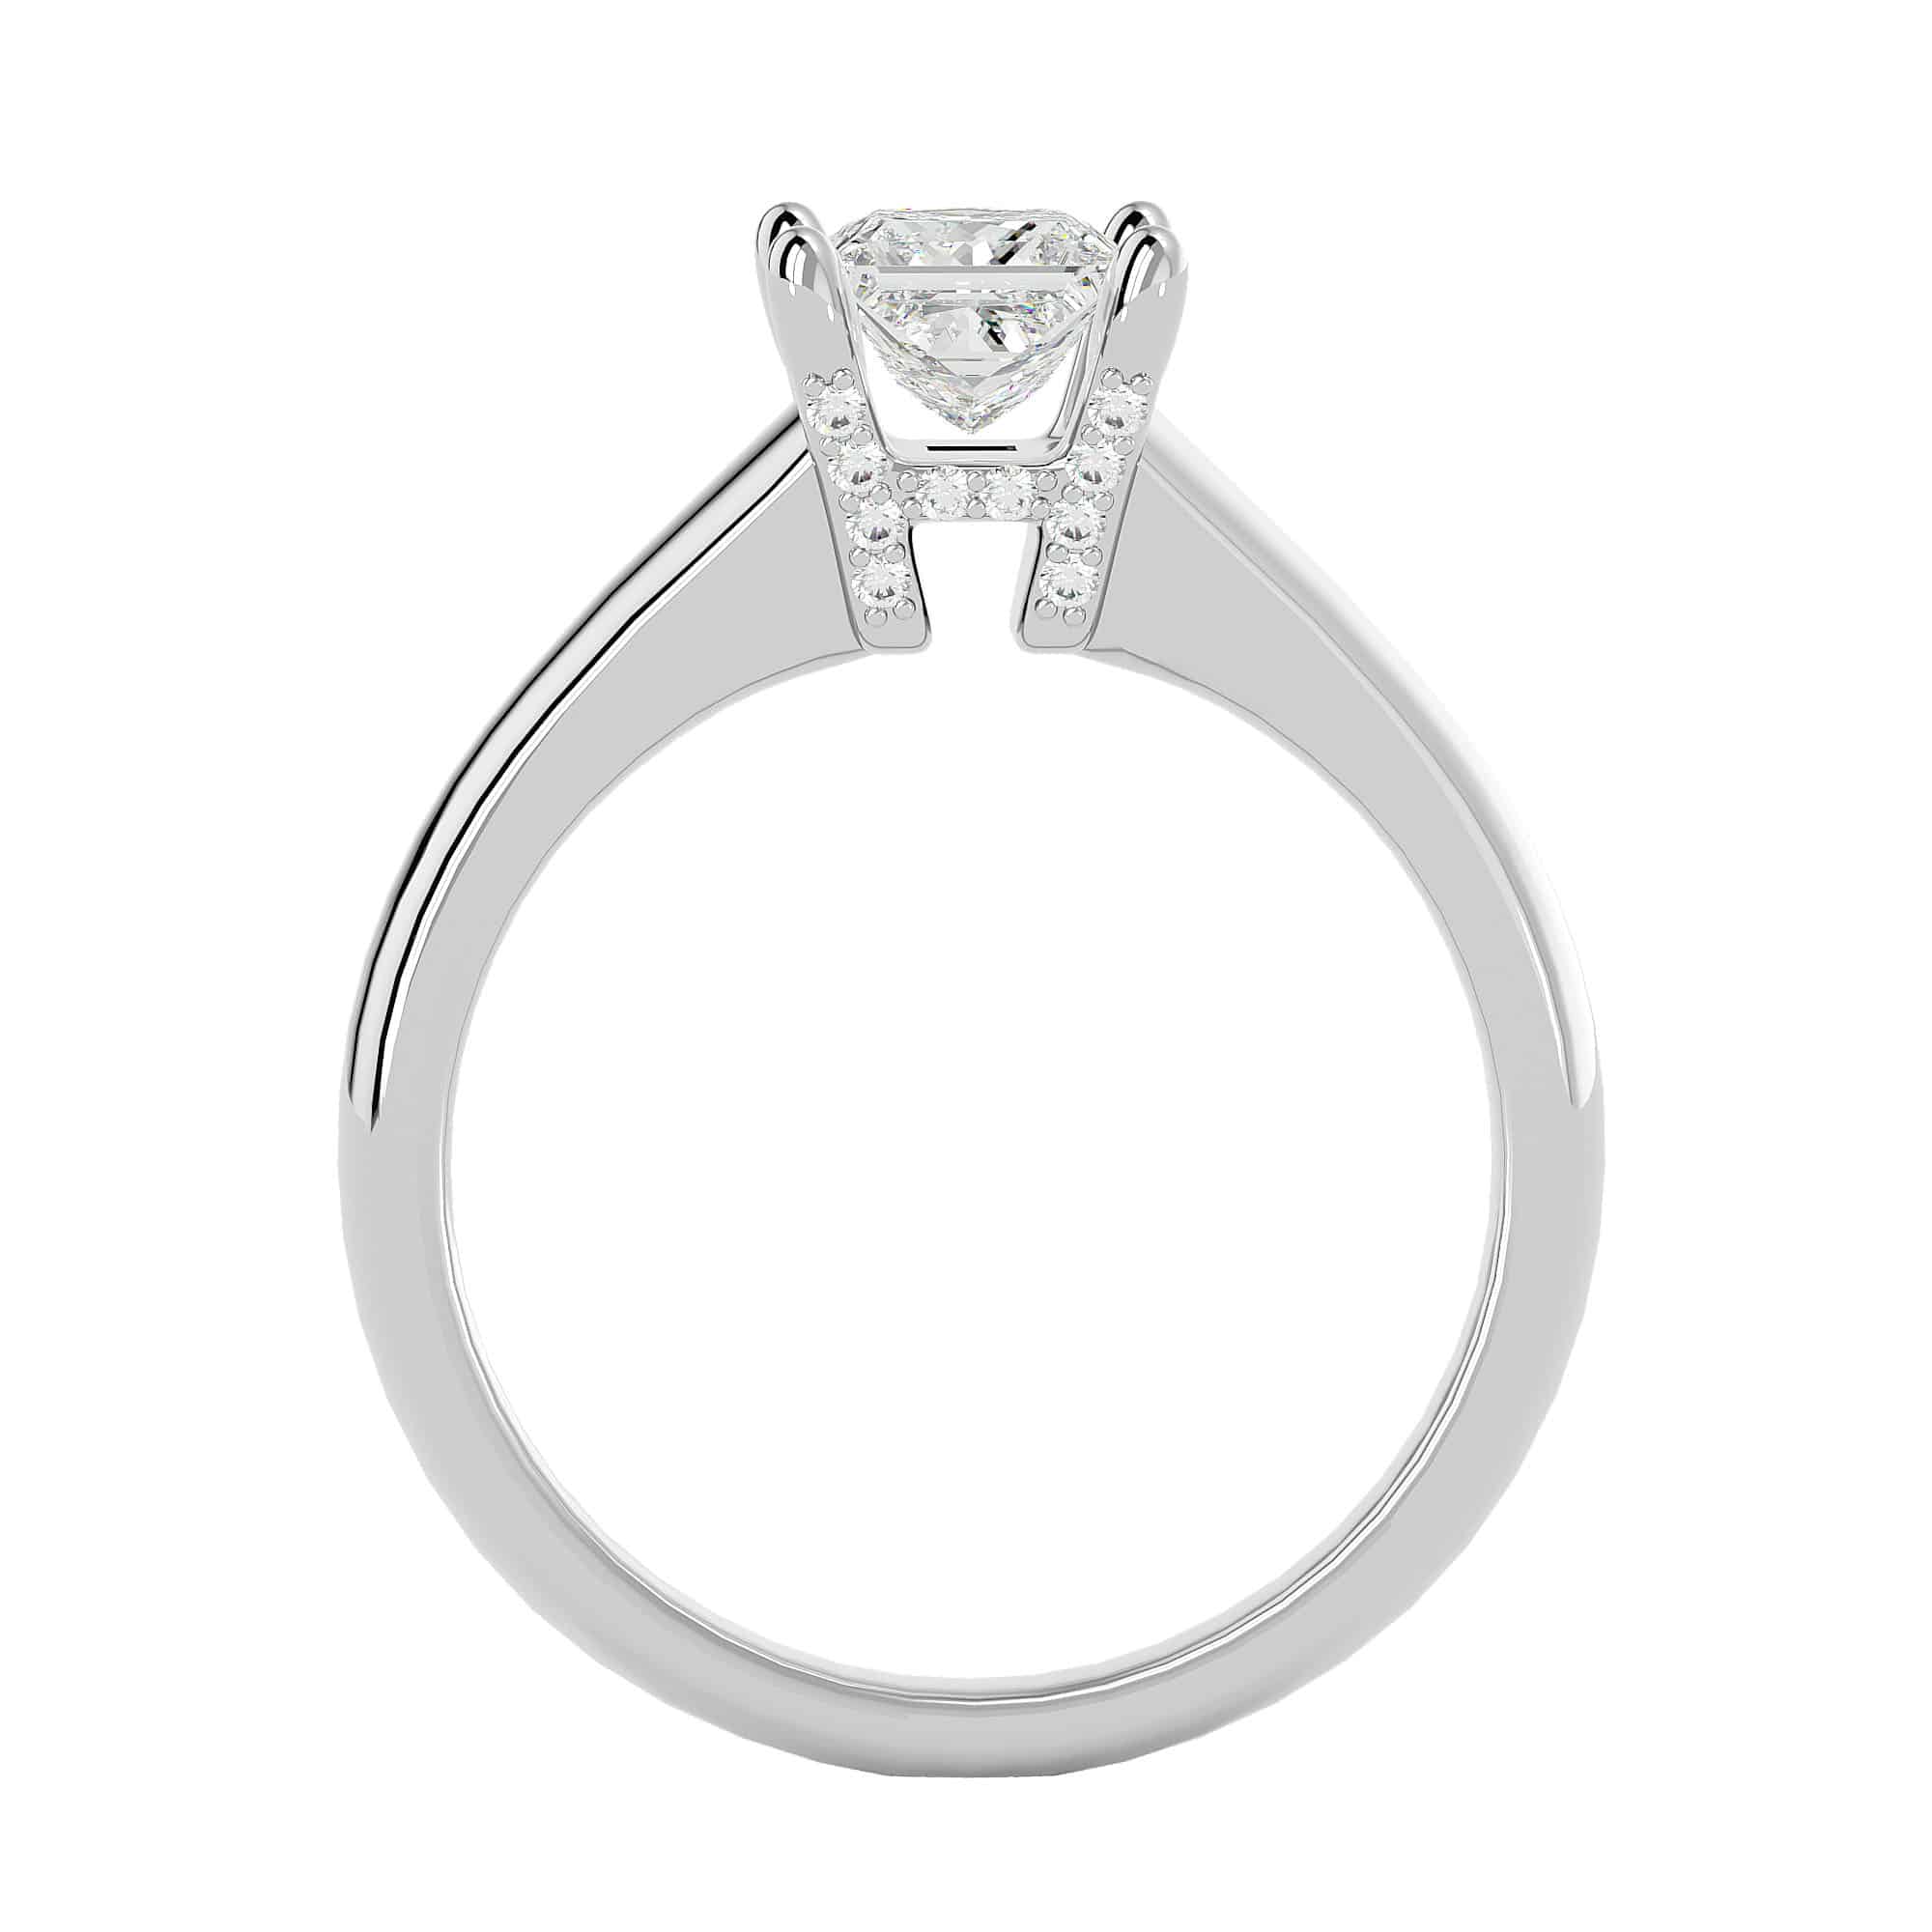 Lucy Princess Cut Engagement Ring Wide Band Setting